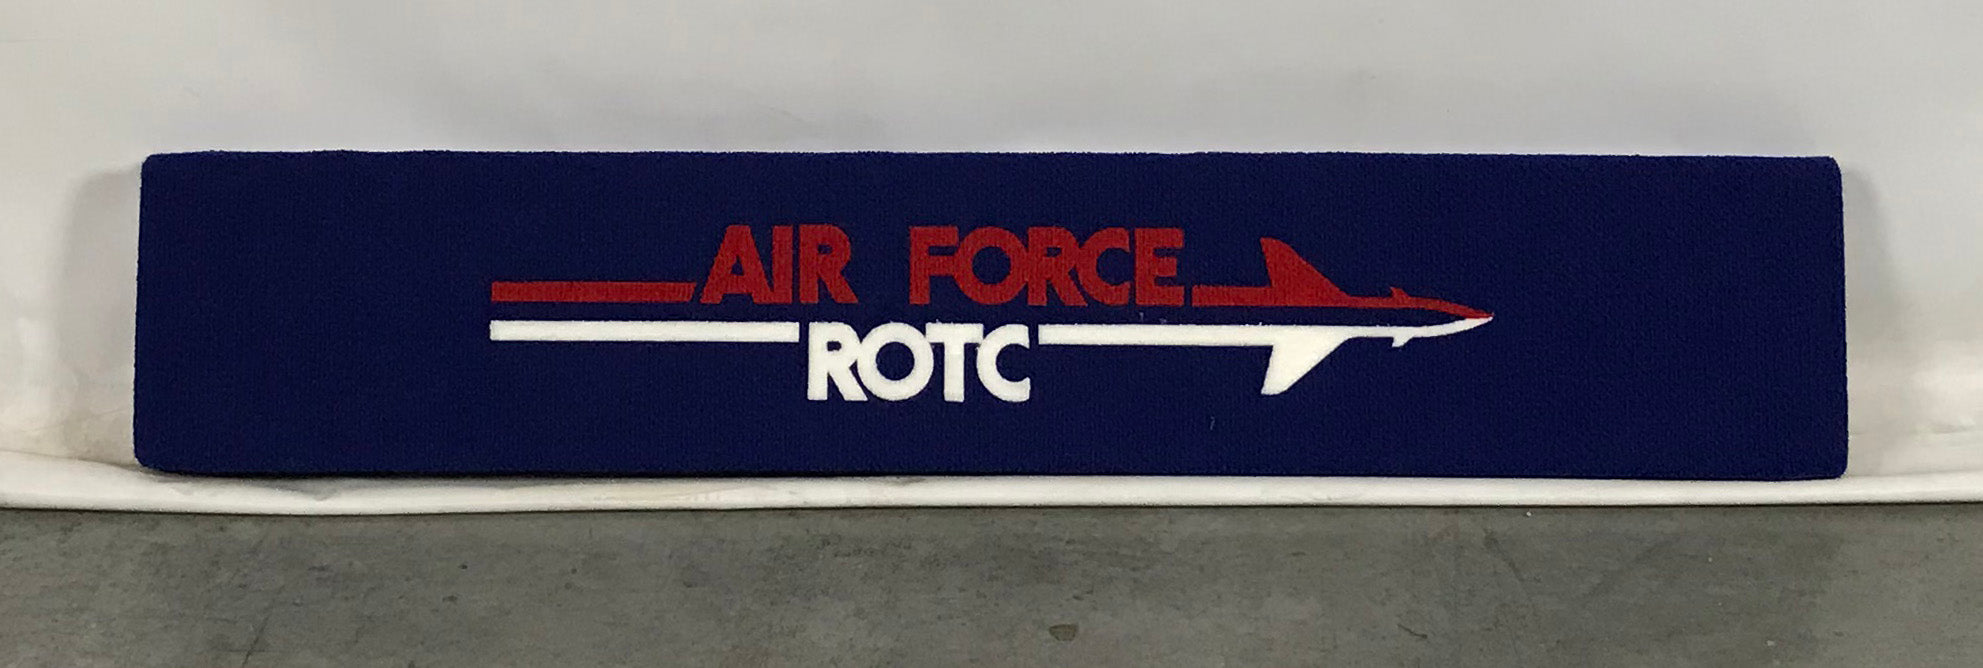 Air Force and ROTC Display